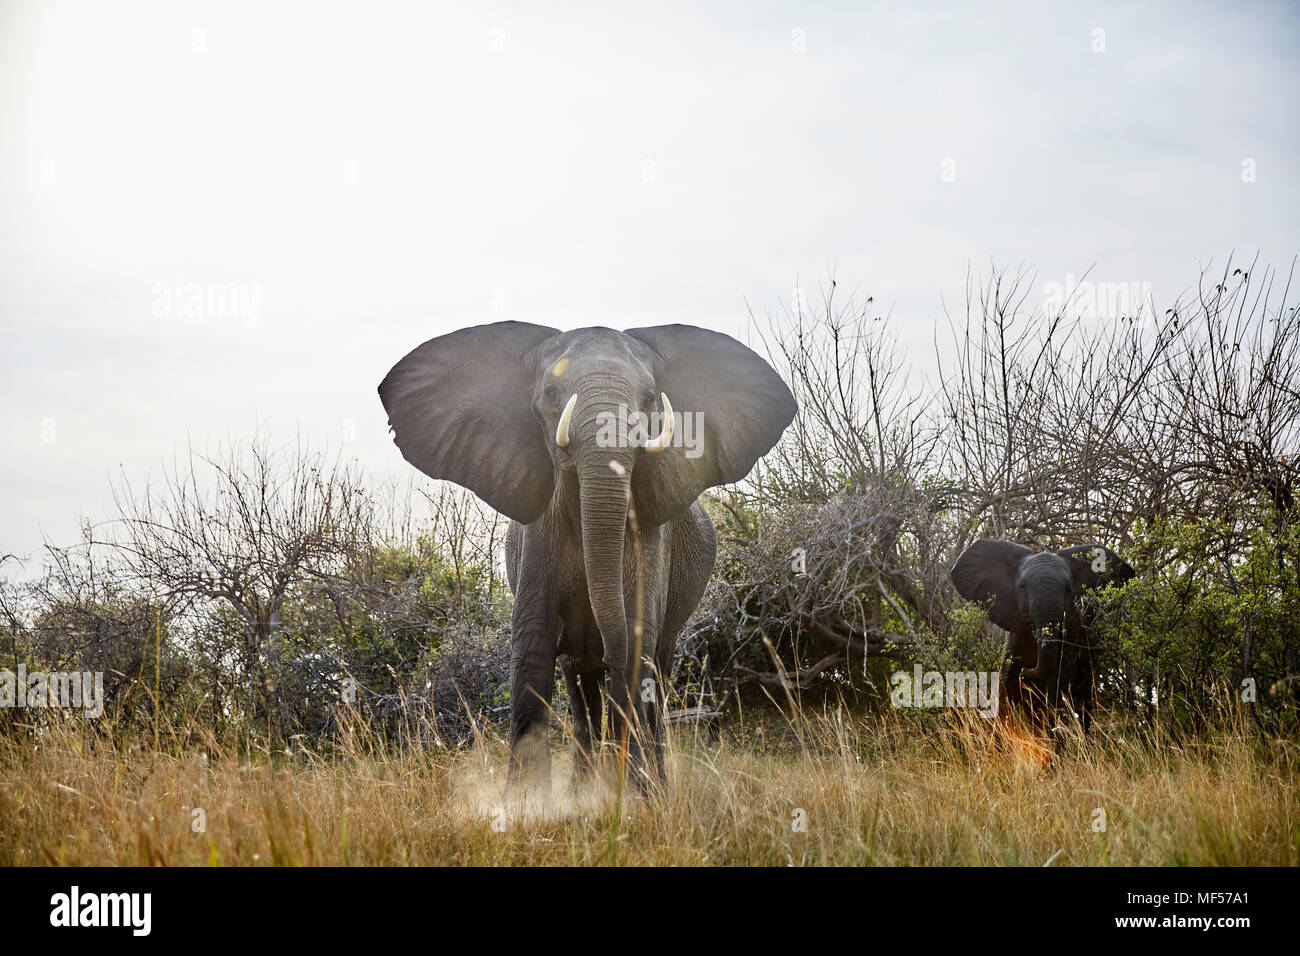 Namibia, Caprivi, cow elephant in defensive attitude, young animal in the background Stock Photo